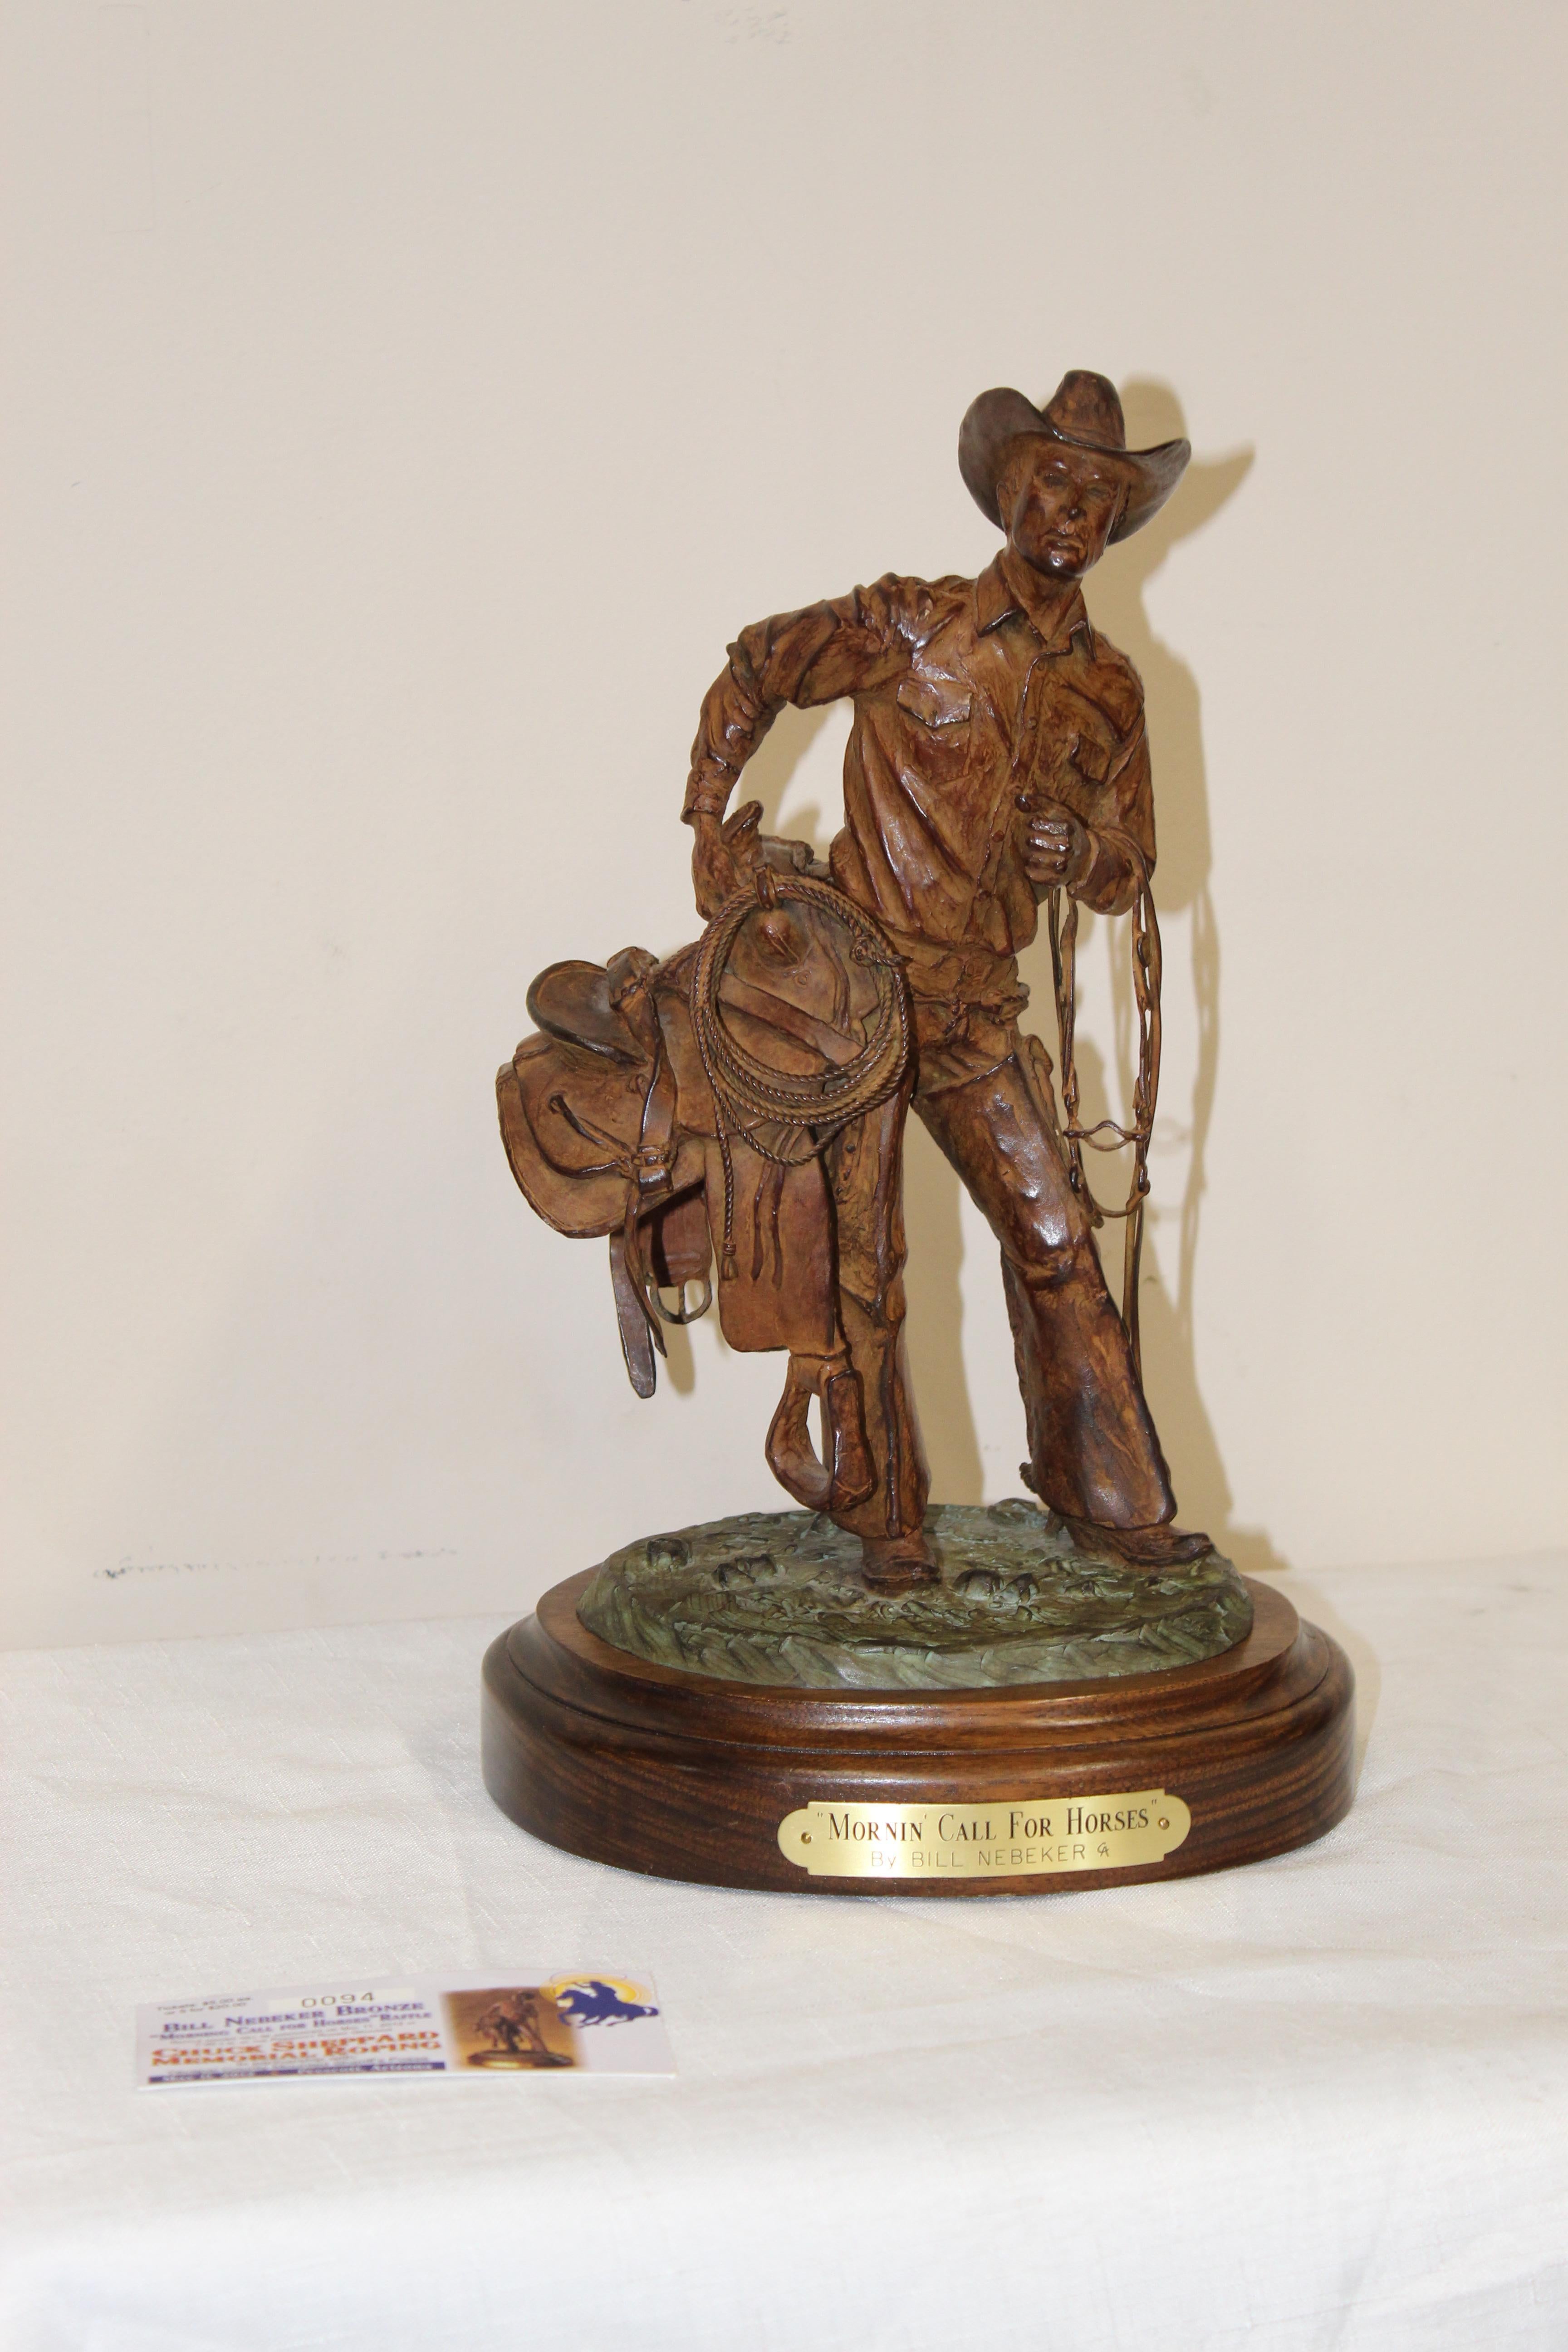 2004 Limited Numbered Statues by Bill Nebeker. This unit is number 27 out of 30 that were made, this sculpture is also on a rotating base.
American cowboy has always been an example of the independent, self-reliant, loner, but dependable man who